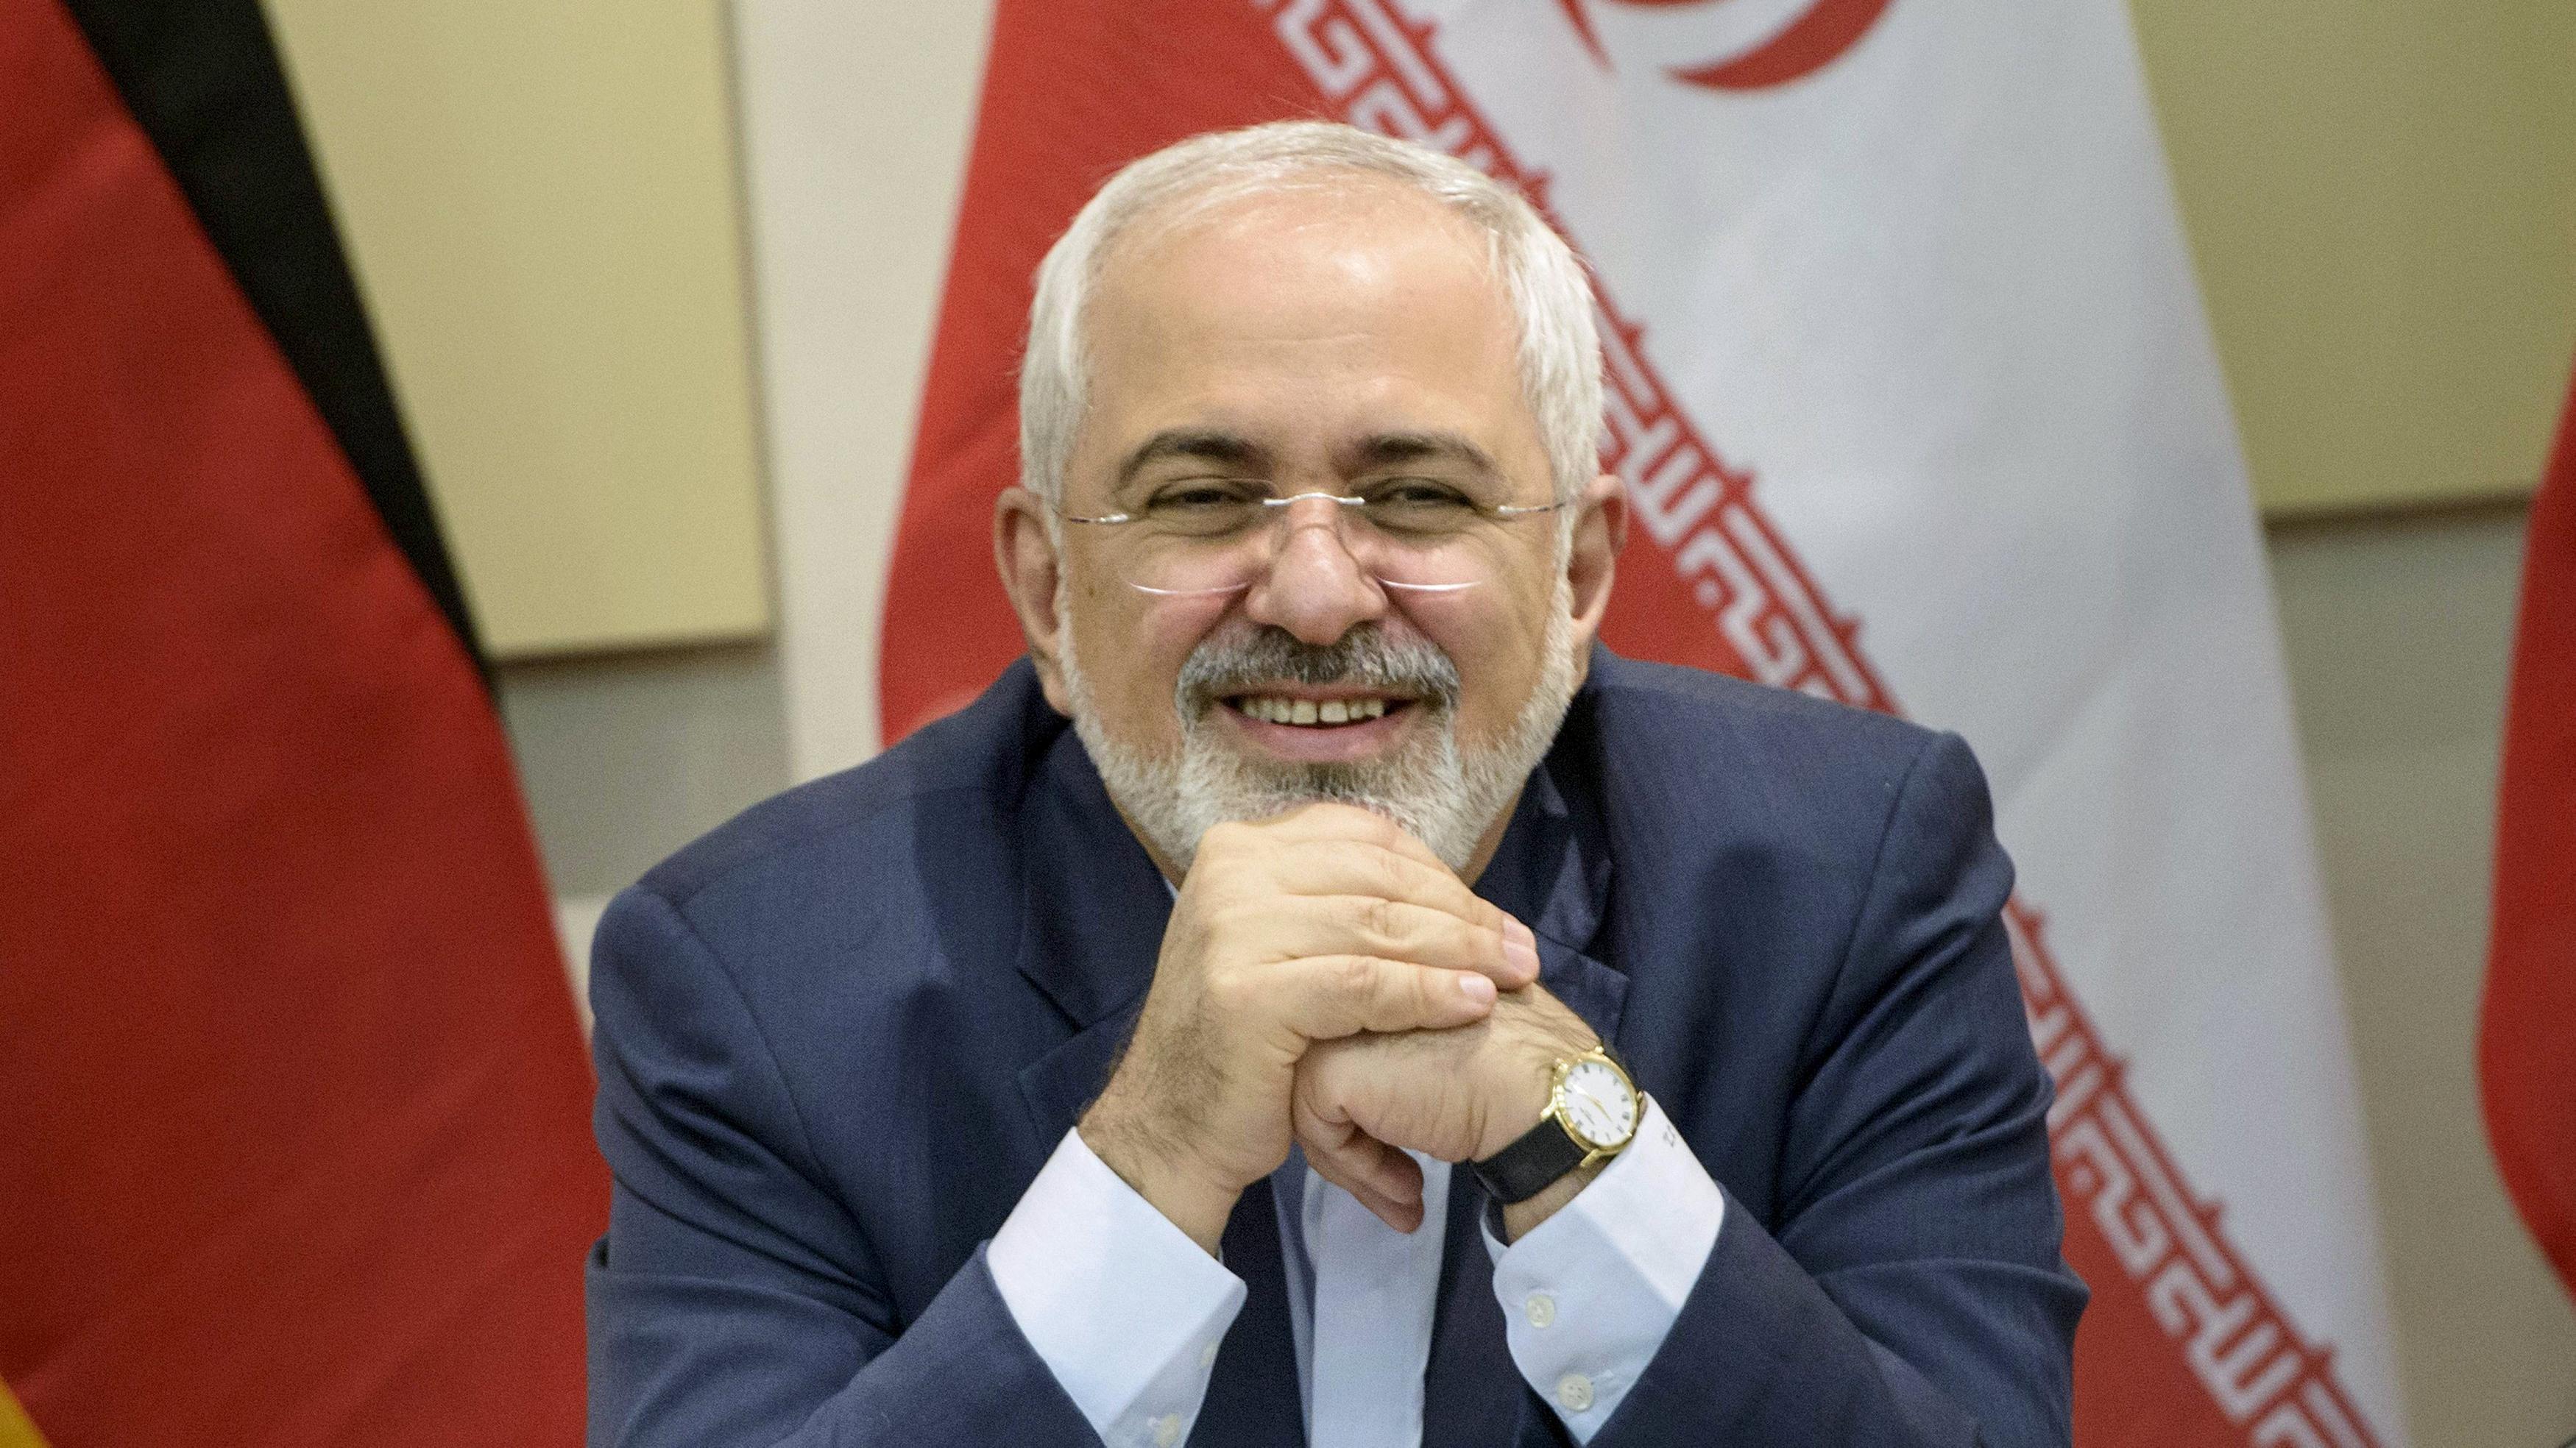 Iranian Foreign Minister Javad Zarif smiles as he waits for the start of a meeting with P5+1, European Union and Iranian officials at the Beau Rivage Palace Hotel in Lausanne March 30, 2015, during Iran nuclear talks.